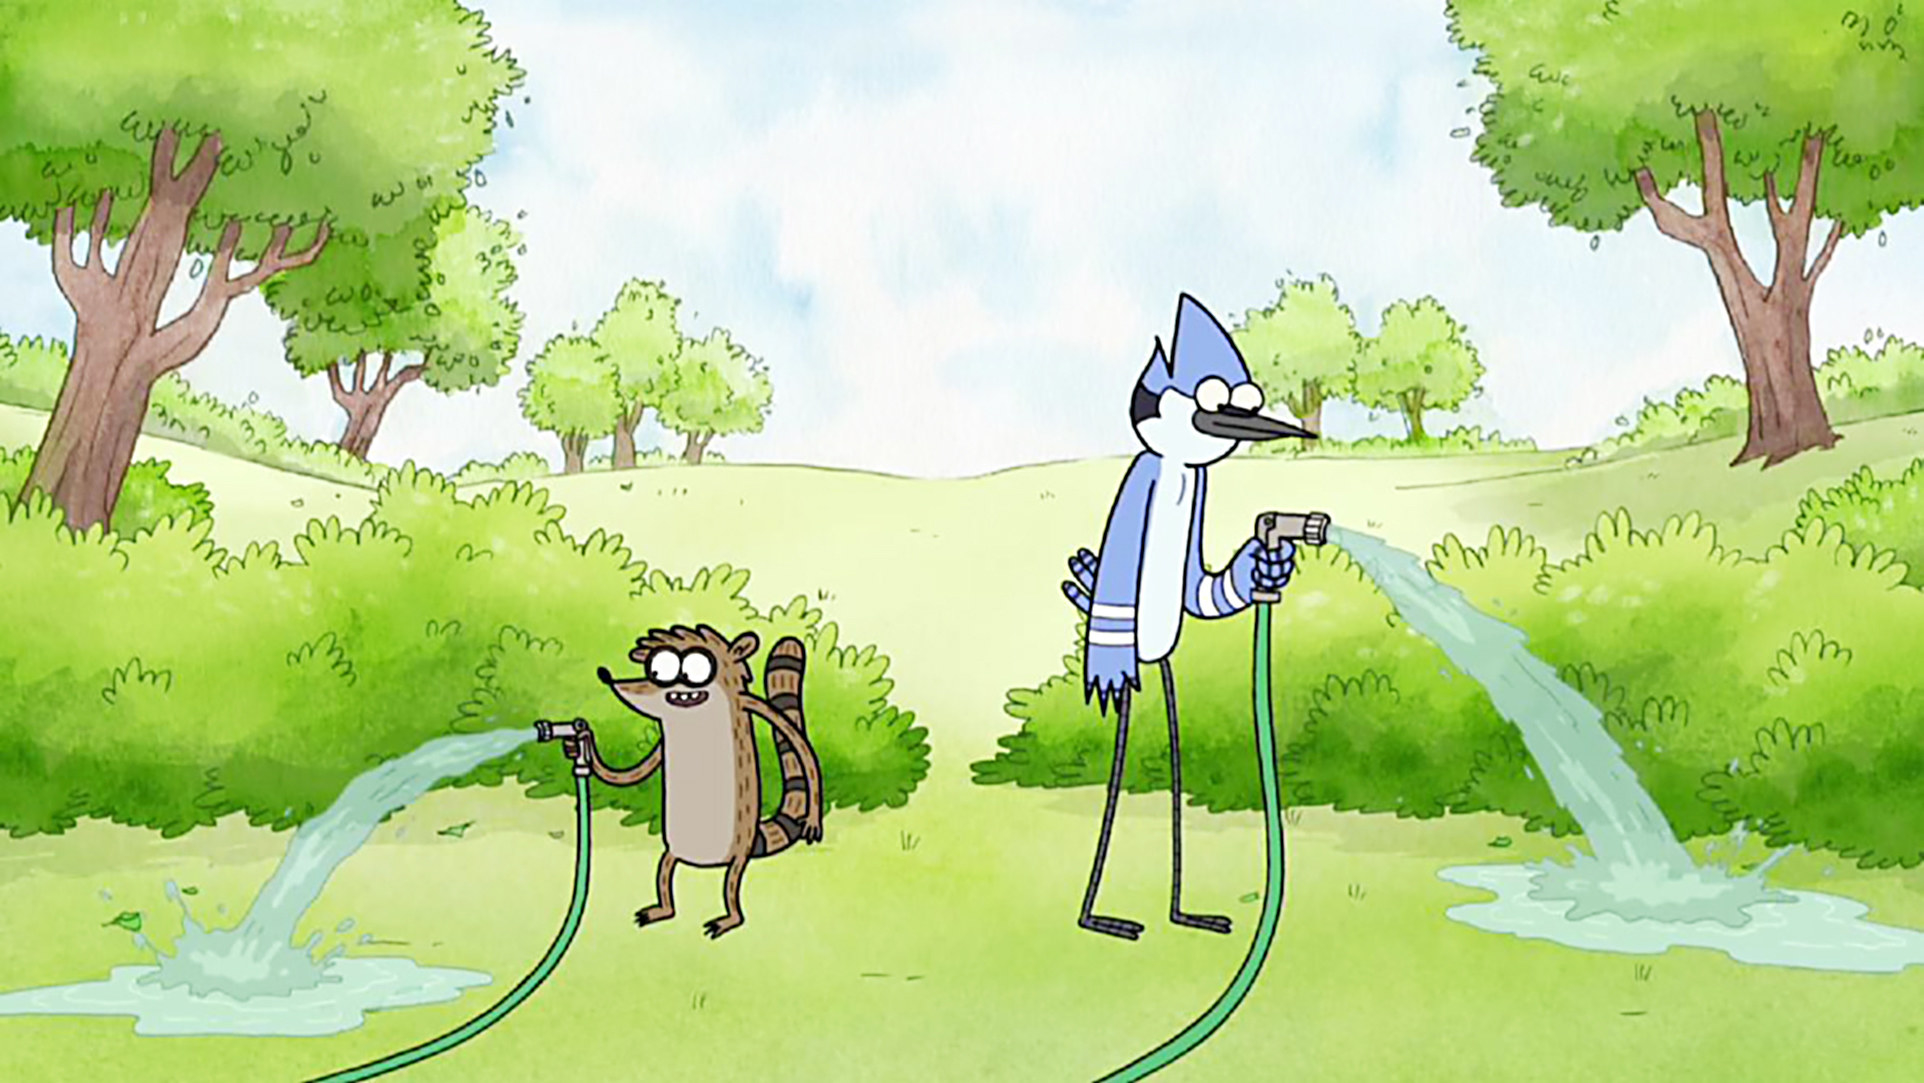 Rigby, a raccoon, and Mordecai, a blue bird, stand and water grass with a hose